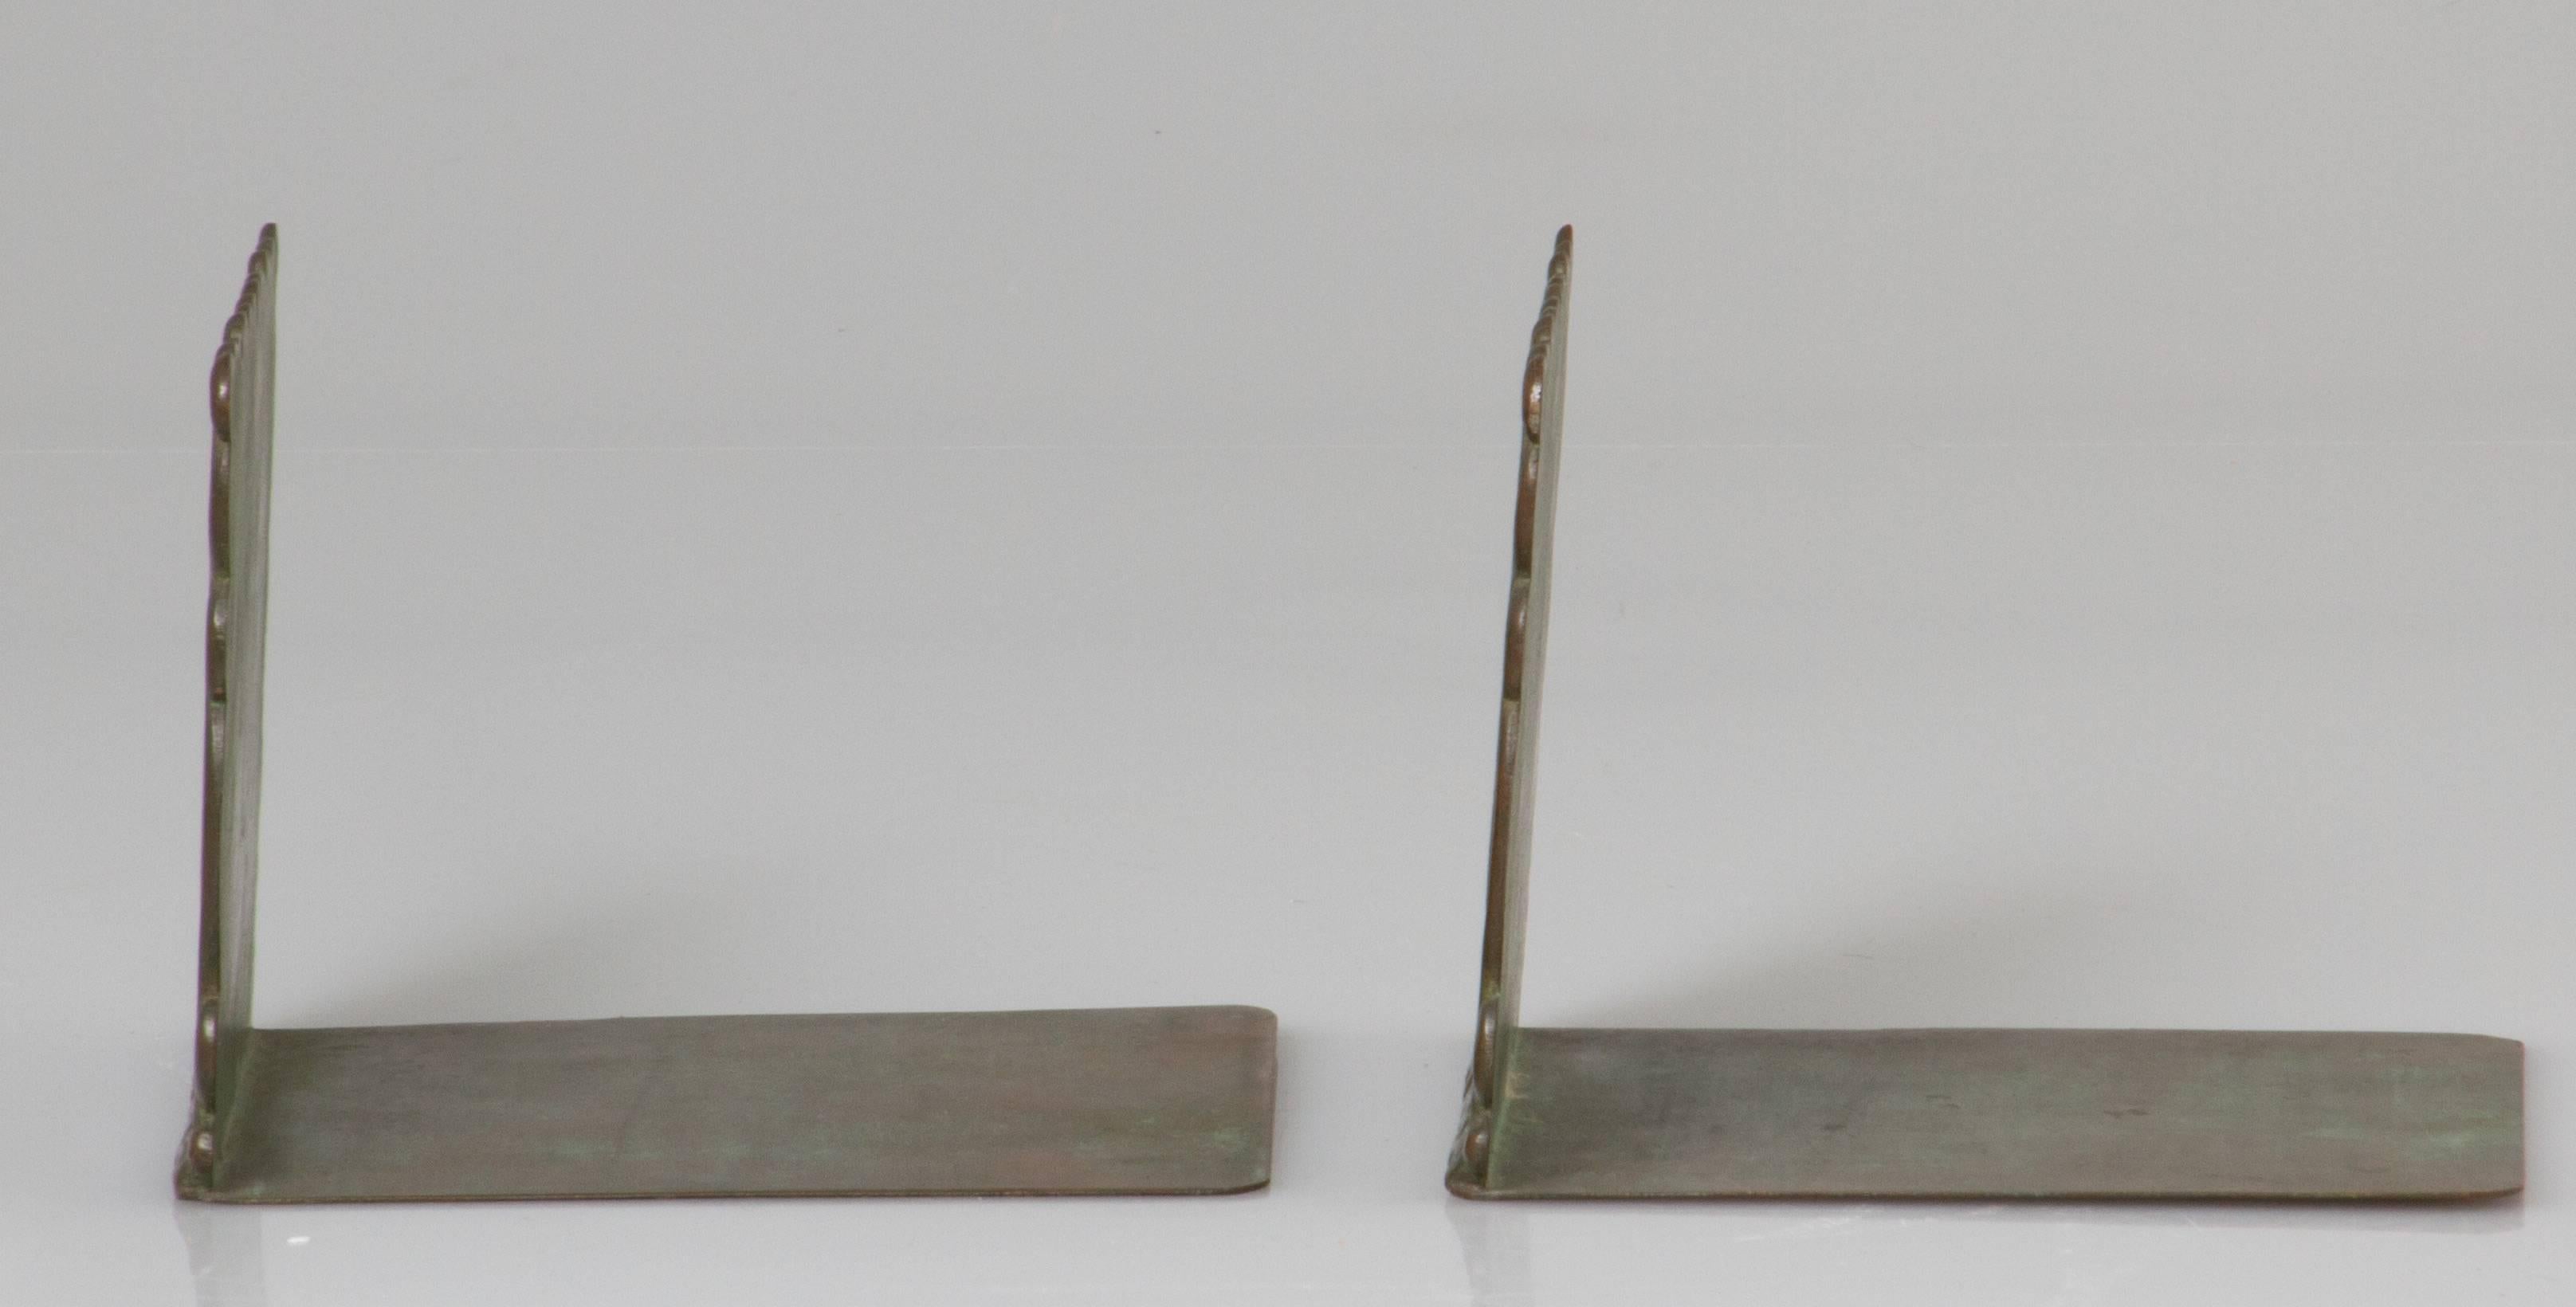 These are a textural and abstract pair of bookends from when Marshall Fields had their own in house studio. Made of copper, they have their wonderful original patina.